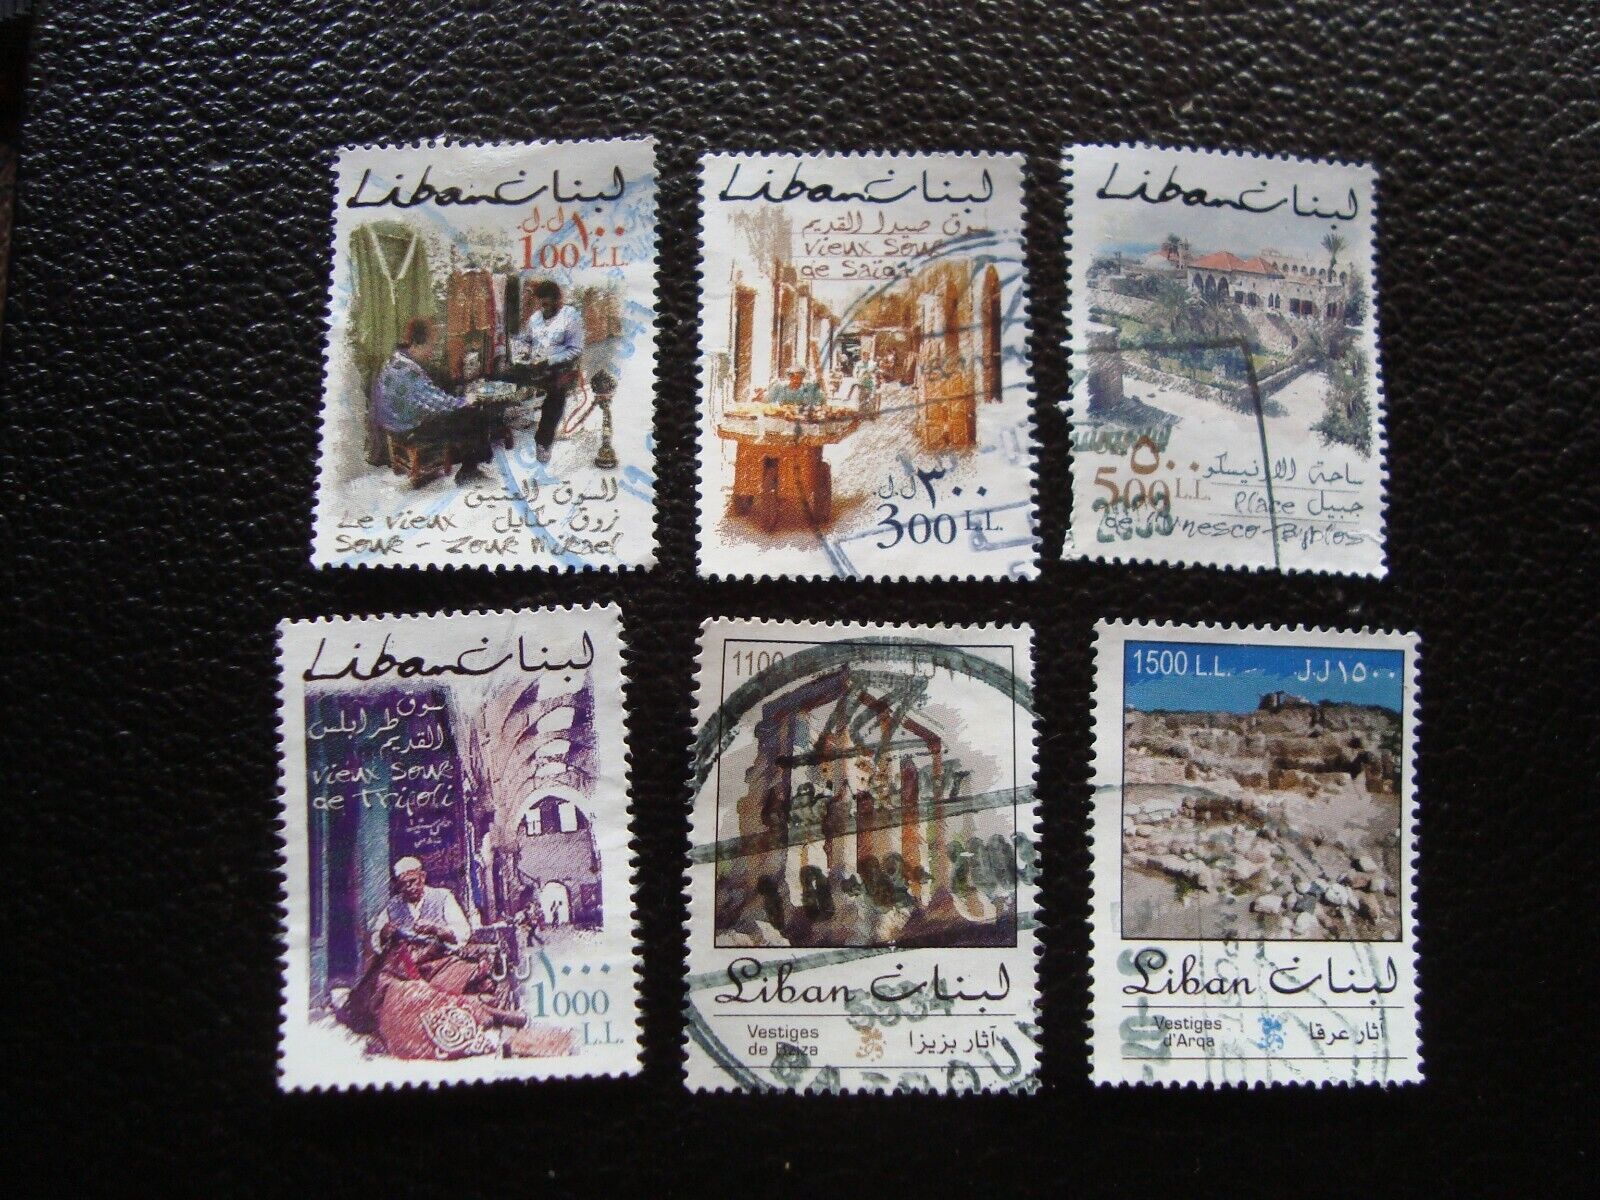 Lebanon Stamp Yvert Ranking TOP1 Tellier Nº 372 380 377 373 A45 Challenge the lowest price of Japan ☆ Stamped A